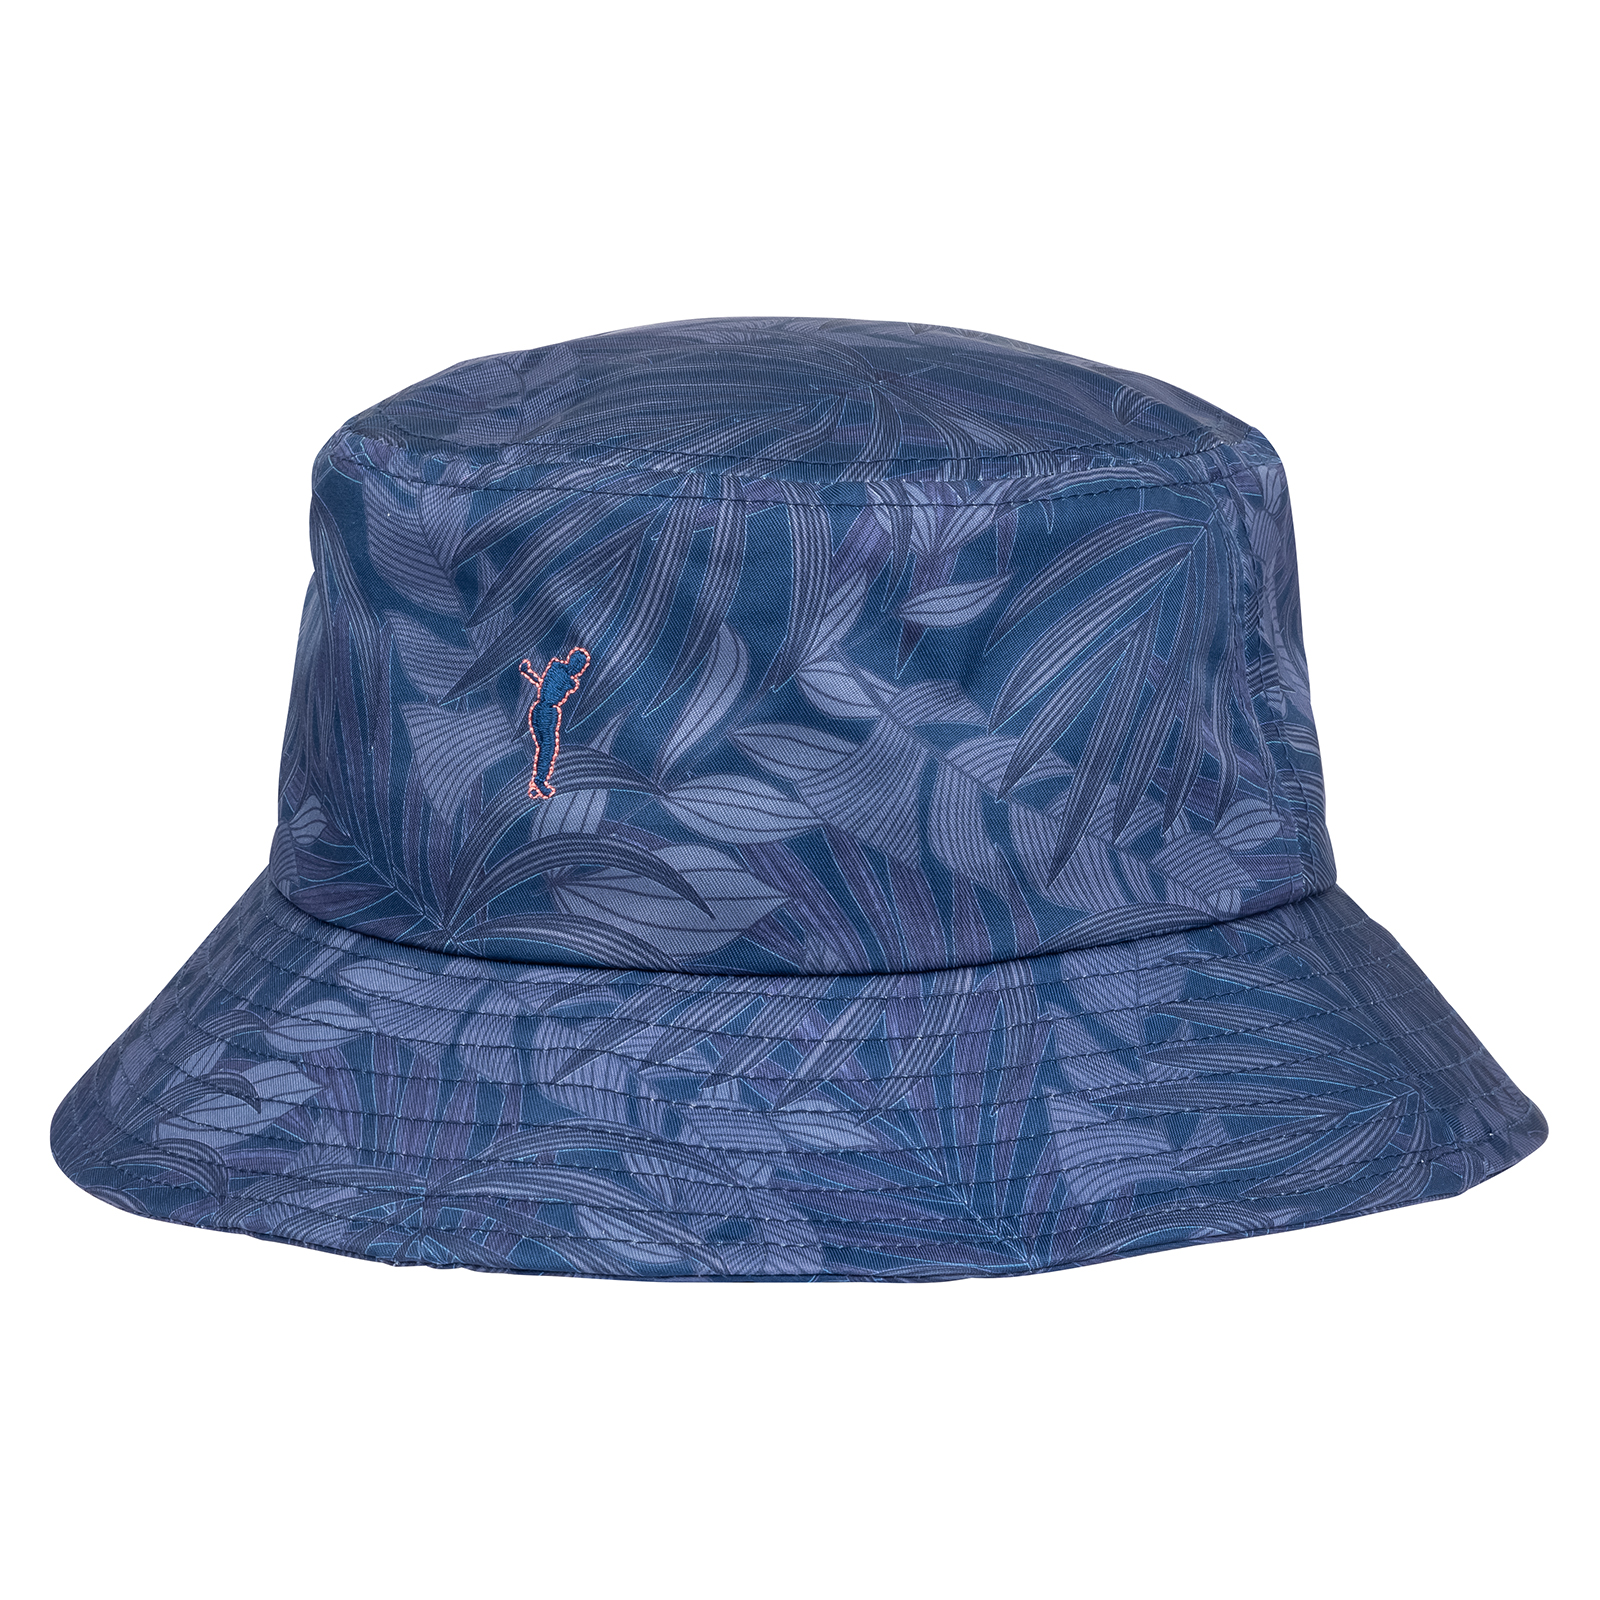 Attractively patterned men's bucket hat